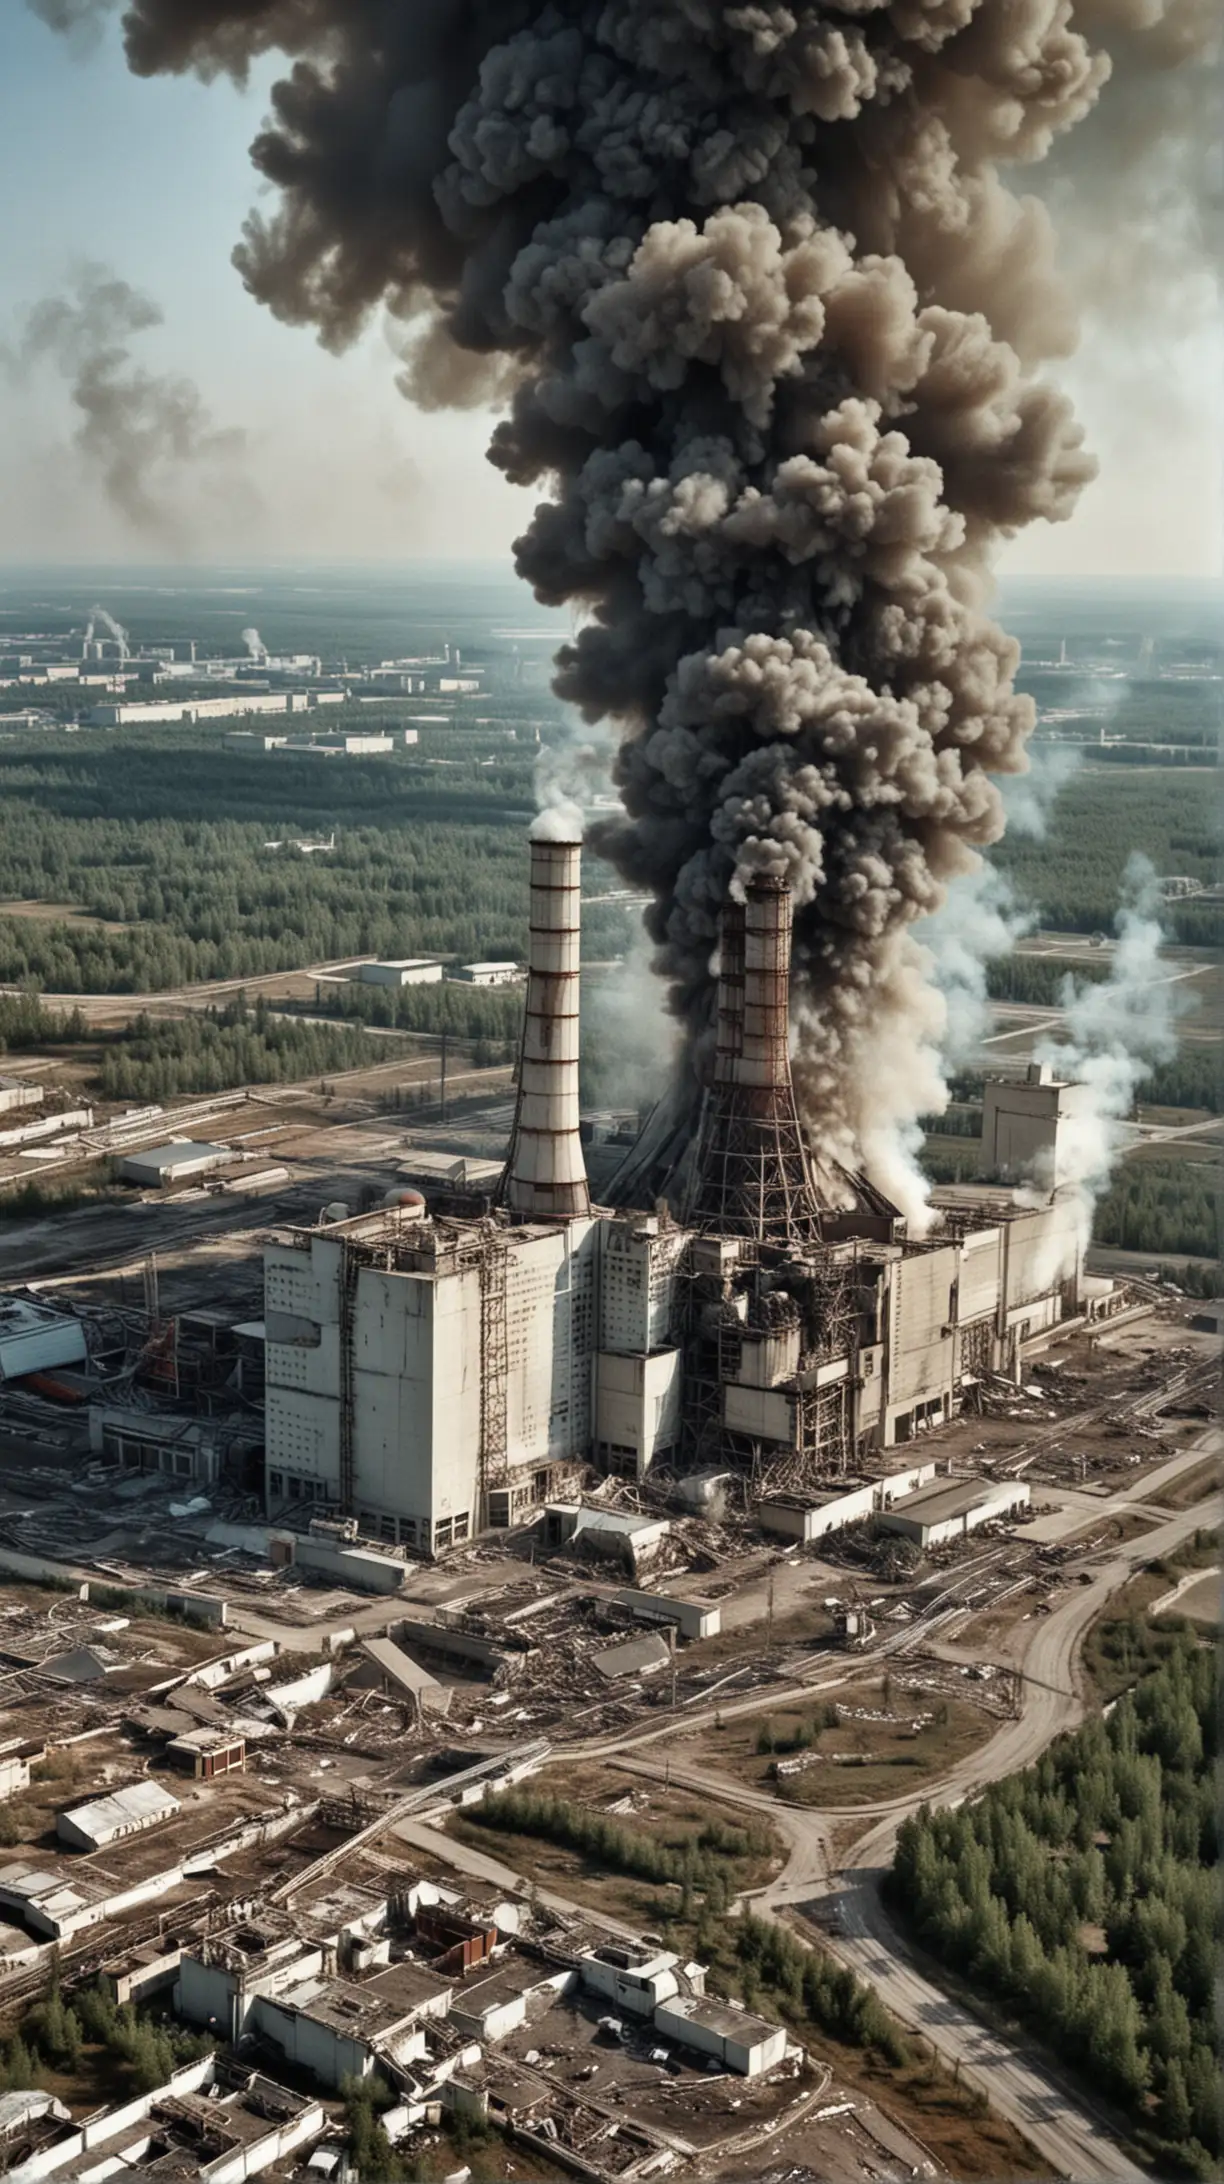 Chernobyl Disaster: An evocative image of the Chernobyl nuclear power plant after the catastrophic explosion in 1986, with smoke billowing from the damaged reactor. Accompany the image with a caption explaining the environmental and social impact of the Chernobyl disaster on the Soviet Union and its eventual role in undermining public trust in the government.